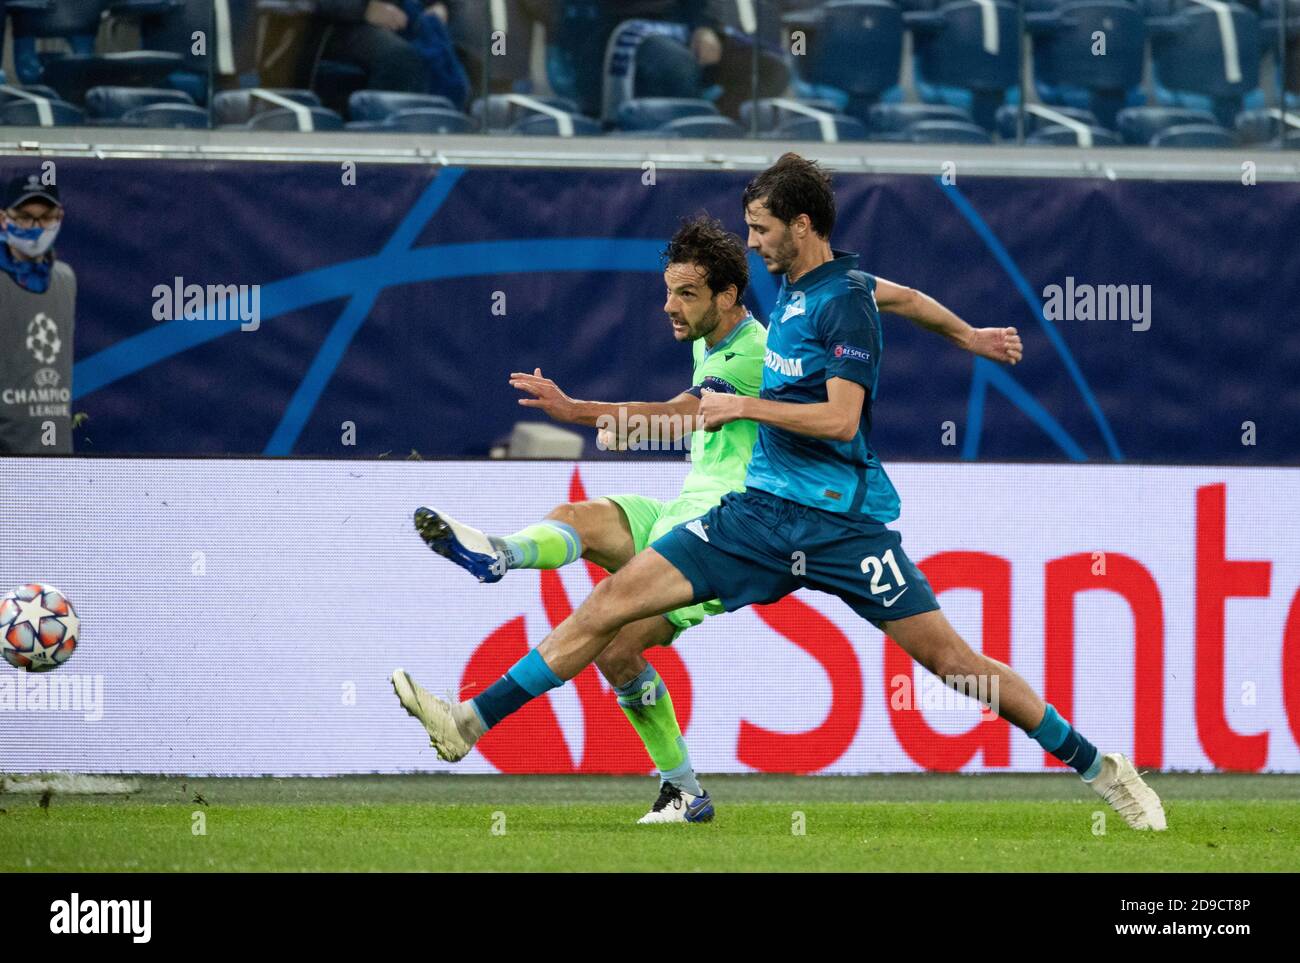 SAINT PETERSBURG, RUSSIA - NOVEMBER 04: Marco Parolo of SS Lazio and Aleksandr Yerokhin of Zenit St Petersburg during the UEFA Champions League Group F stage match between Zenit St. Petersburg and SS Lazio at Gazprom Arena on November 4, 2020 in Saint Petersburg, Russia. (Photo by MB Media) Stock Photo